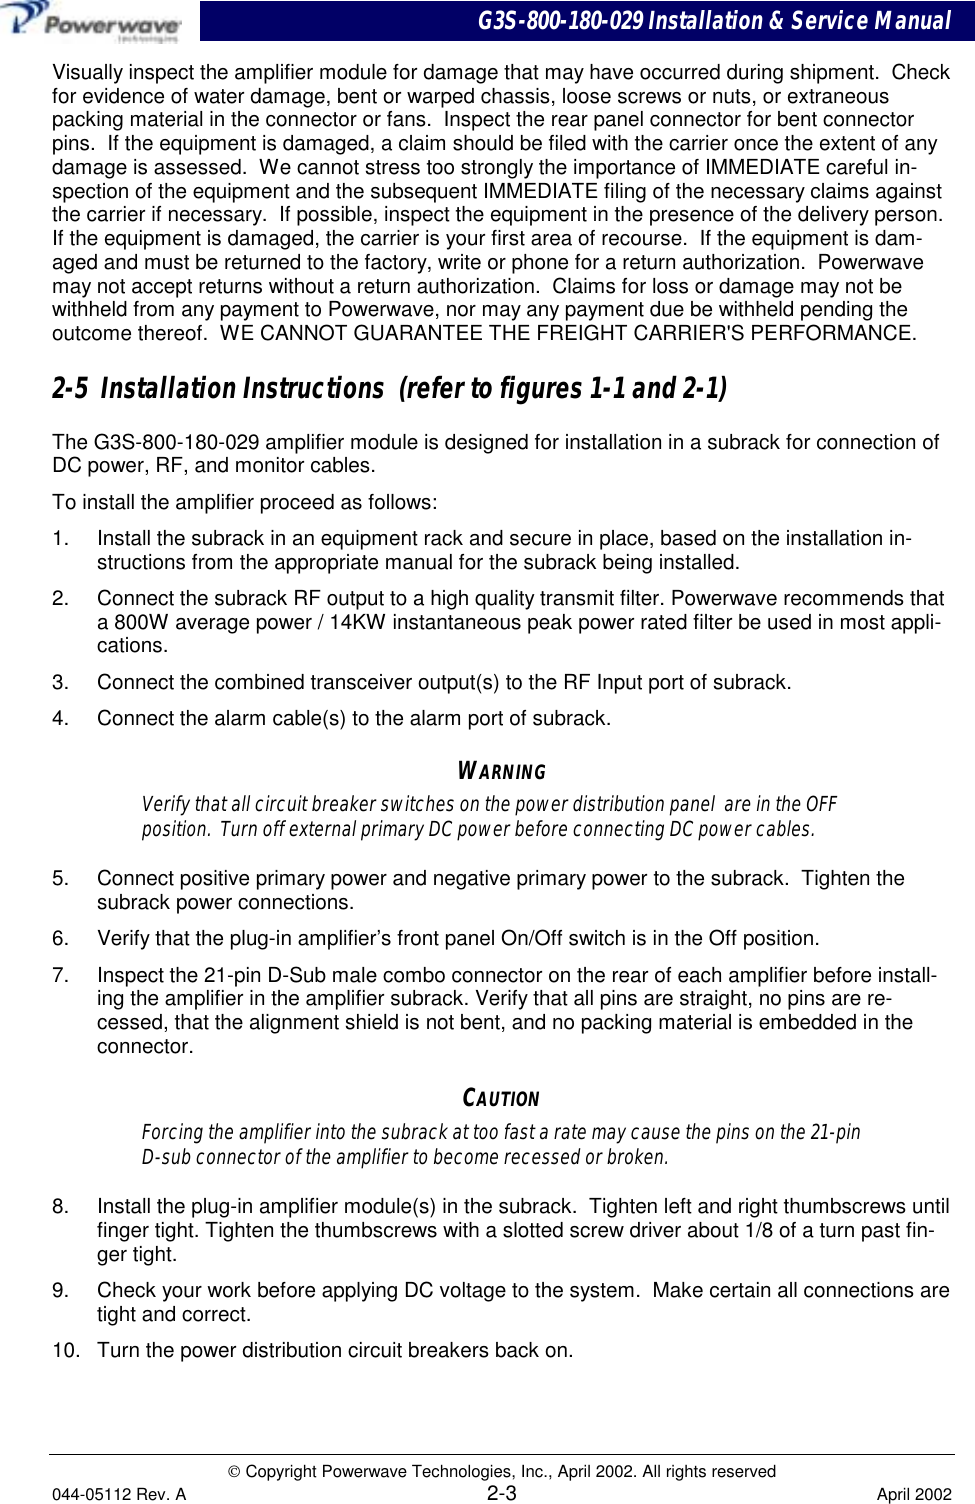 G3S-800-180-029 Installation &amp; Service Manual Copyright Powerwave Technologies, Inc., April 2002. All rights reserved044-05112 Rev. A 2-3 April 2002Visually inspect the amplifier module for damage that may have occurred during shipment.  Checkfor evidence of water damage, bent or warped chassis, loose screws or nuts, or extraneouspacking material in the connector or fans.  Inspect the rear panel connector for bent connectorpins.  If the equipment is damaged, a claim should be filed with the carrier once the extent of anydamage is assessed.  We cannot stress too strongly the importance of IMMEDIATE careful in-spection of the equipment and the subsequent IMMEDIATE filing of the necessary claims againstthe carrier if necessary.  If possible, inspect the equipment in the presence of the delivery person.If the equipment is damaged, the carrier is your first area of recourse.  If the equipment is dam-aged and must be returned to the factory, write or phone for a return authorization.  Powerwavemay not accept returns without a return authorization.  Claims for loss or damage may not bewithheld from any payment to Powerwave, nor may any payment due be withheld pending theoutcome thereof.  WE CANNOT GUARANTEE THE FREIGHT CARRIER&apos;S PERFORMANCE.2-5  Installation Instructions  (refer to figures 1-1 and 2-1)The G3S-800-180-029 amplifier module is designed for installation in a subrack for connection ofDC power, RF, and monitor cables.To install the amplifier proceed as follows:1.  Install the subrack in an equipment rack and secure in place, based on the installation in-structions from the appropriate manual for the subrack being installed.2.  Connect the subrack RF output to a high quality transmit filter. Powerwave recommends thata 800W average power / 14KW instantaneous peak power rated filter be used in most appli-cations.3.  Connect the combined transceiver output(s) to the RF Input port of subrack.4.  Connect the alarm cable(s) to the alarm port of subrack.WARNINGVerify that all circuit breaker switches on the power distribution panel  are in the OFFposition.  Turn off external primary DC power before connecting DC power cables.5.  Connect positive primary power and negative primary power to the subrack.  Tighten thesubrack power connections.6.  Verify that the plug-in amplifier’s front panel On/Off switch is in the Off position.7.  Inspect the 21-pin D-Sub male combo connector on the rear of each amplifier before install-ing the amplifier in the amplifier subrack. Verify that all pins are straight, no pins are re-cessed, that the alignment shield is not bent, and no packing material is embedded in theconnector.CAUTIONForcing the amplifier into the subrack at too fast a rate may cause the pins on the 21-pinD-sub connector of the amplifier to become recessed or broken.8.  Install the plug-in amplifier module(s) in the subrack.  Tighten left and right thumbscrews untilfinger tight. Tighten the thumbscrews with a slotted screw driver about 1/8 of a turn past fin-ger tight.9.  Check your work before applying DC voltage to the system.  Make certain all connections aretight and correct.10.  Turn the power distribution circuit breakers back on.